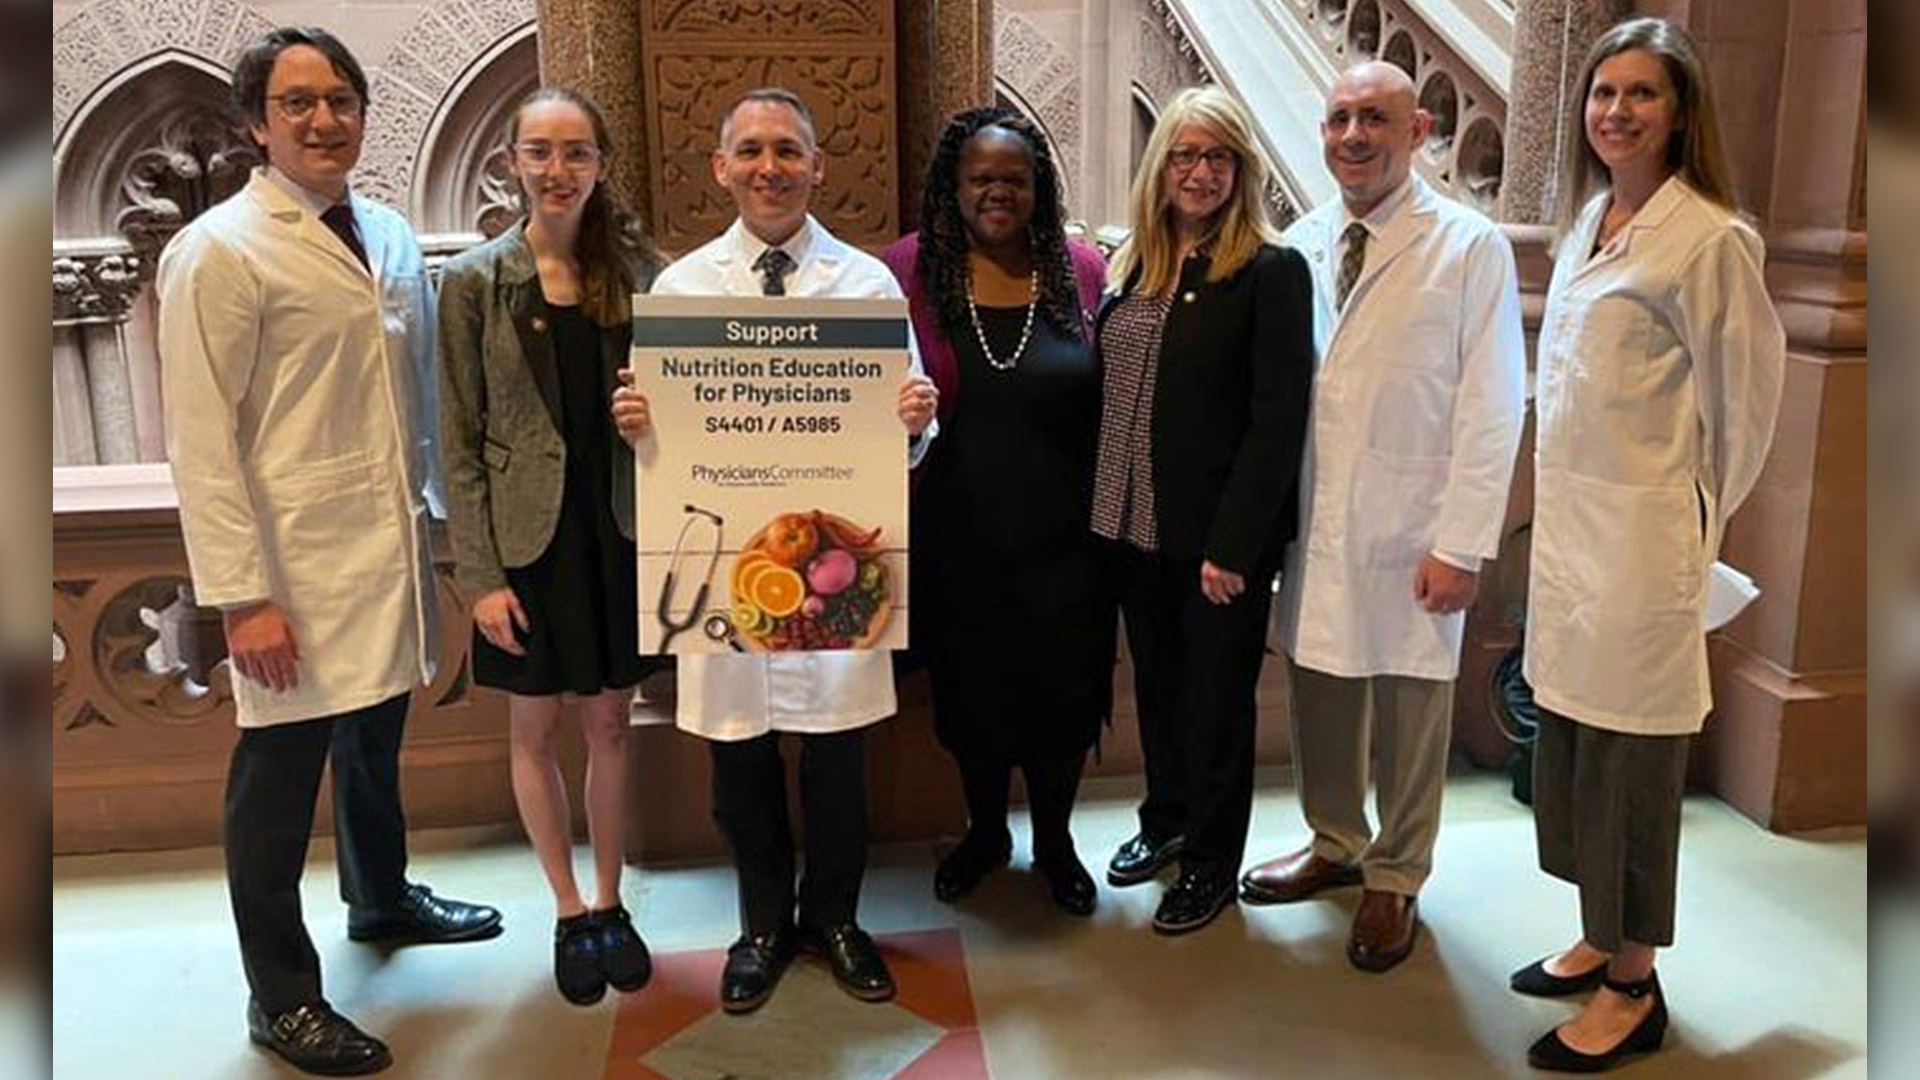 New York Assembly Passes Legislation to Create Nutrition Education Resource Library for Physicians 